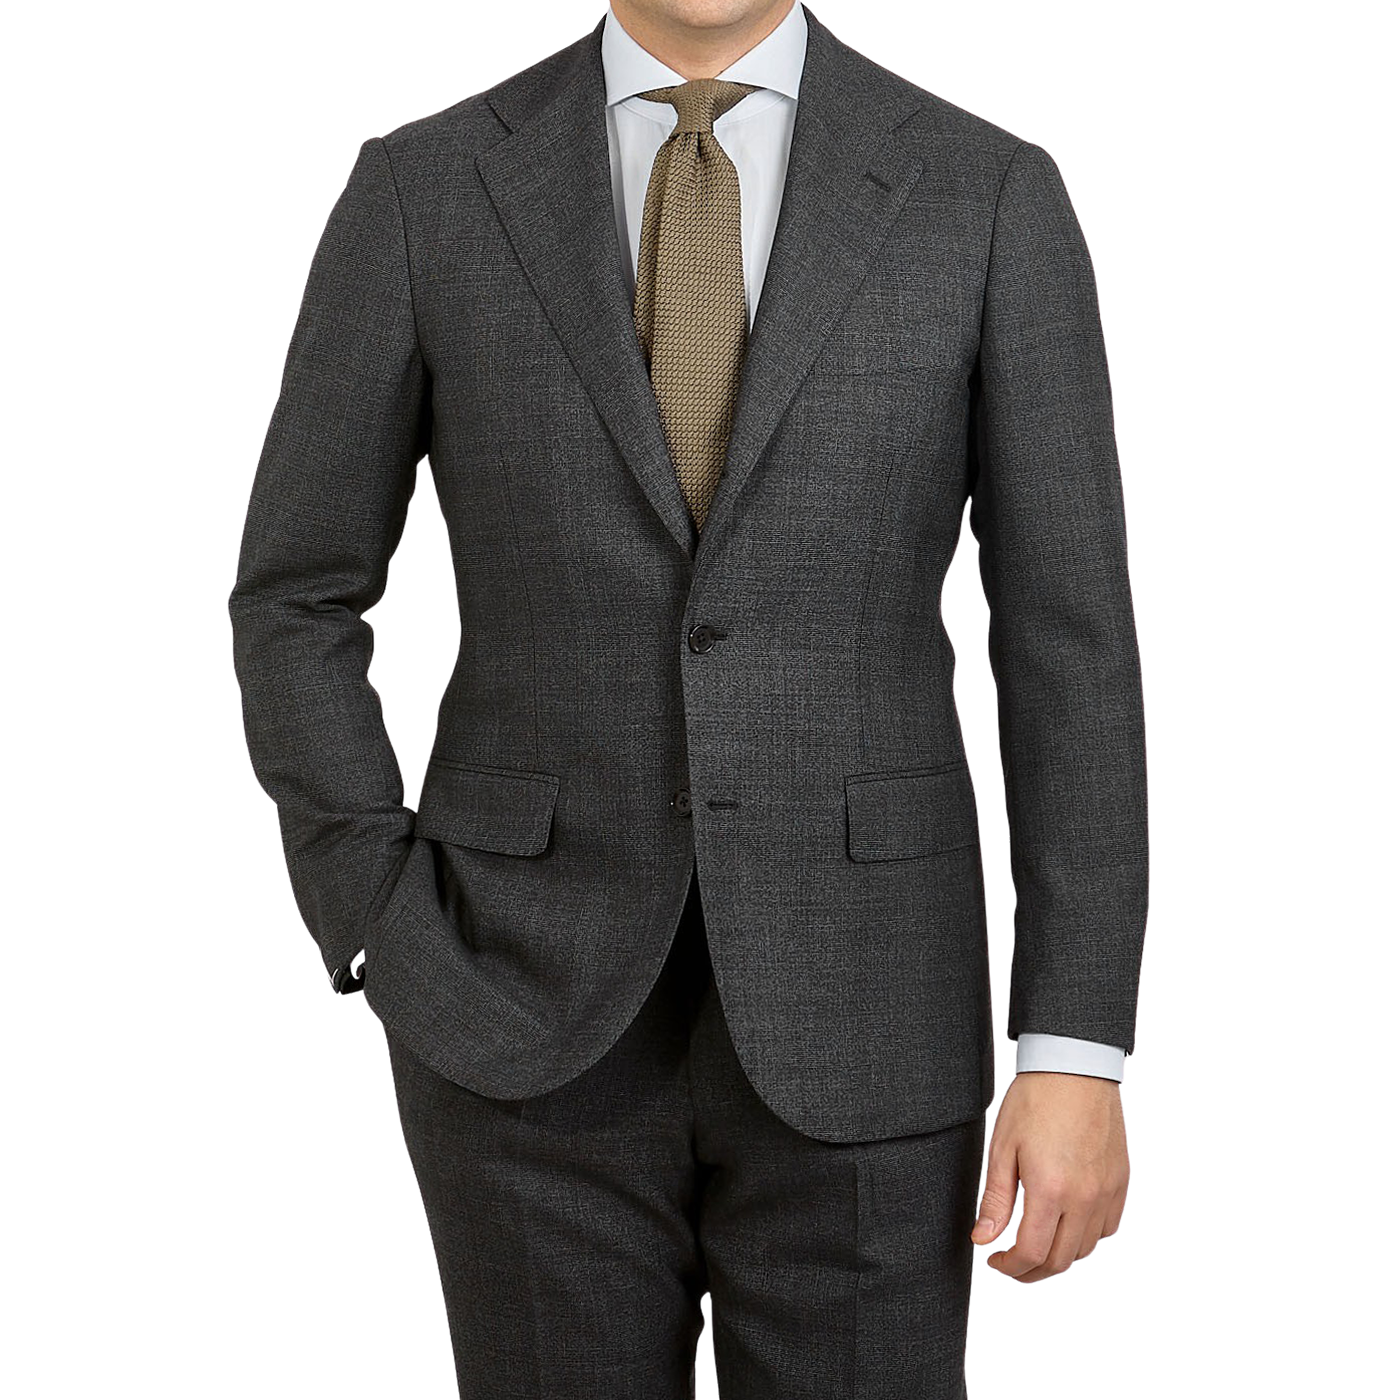 Ring Jacket - Charcoal Grey Prince of Wales Checked Suit | Baltzar